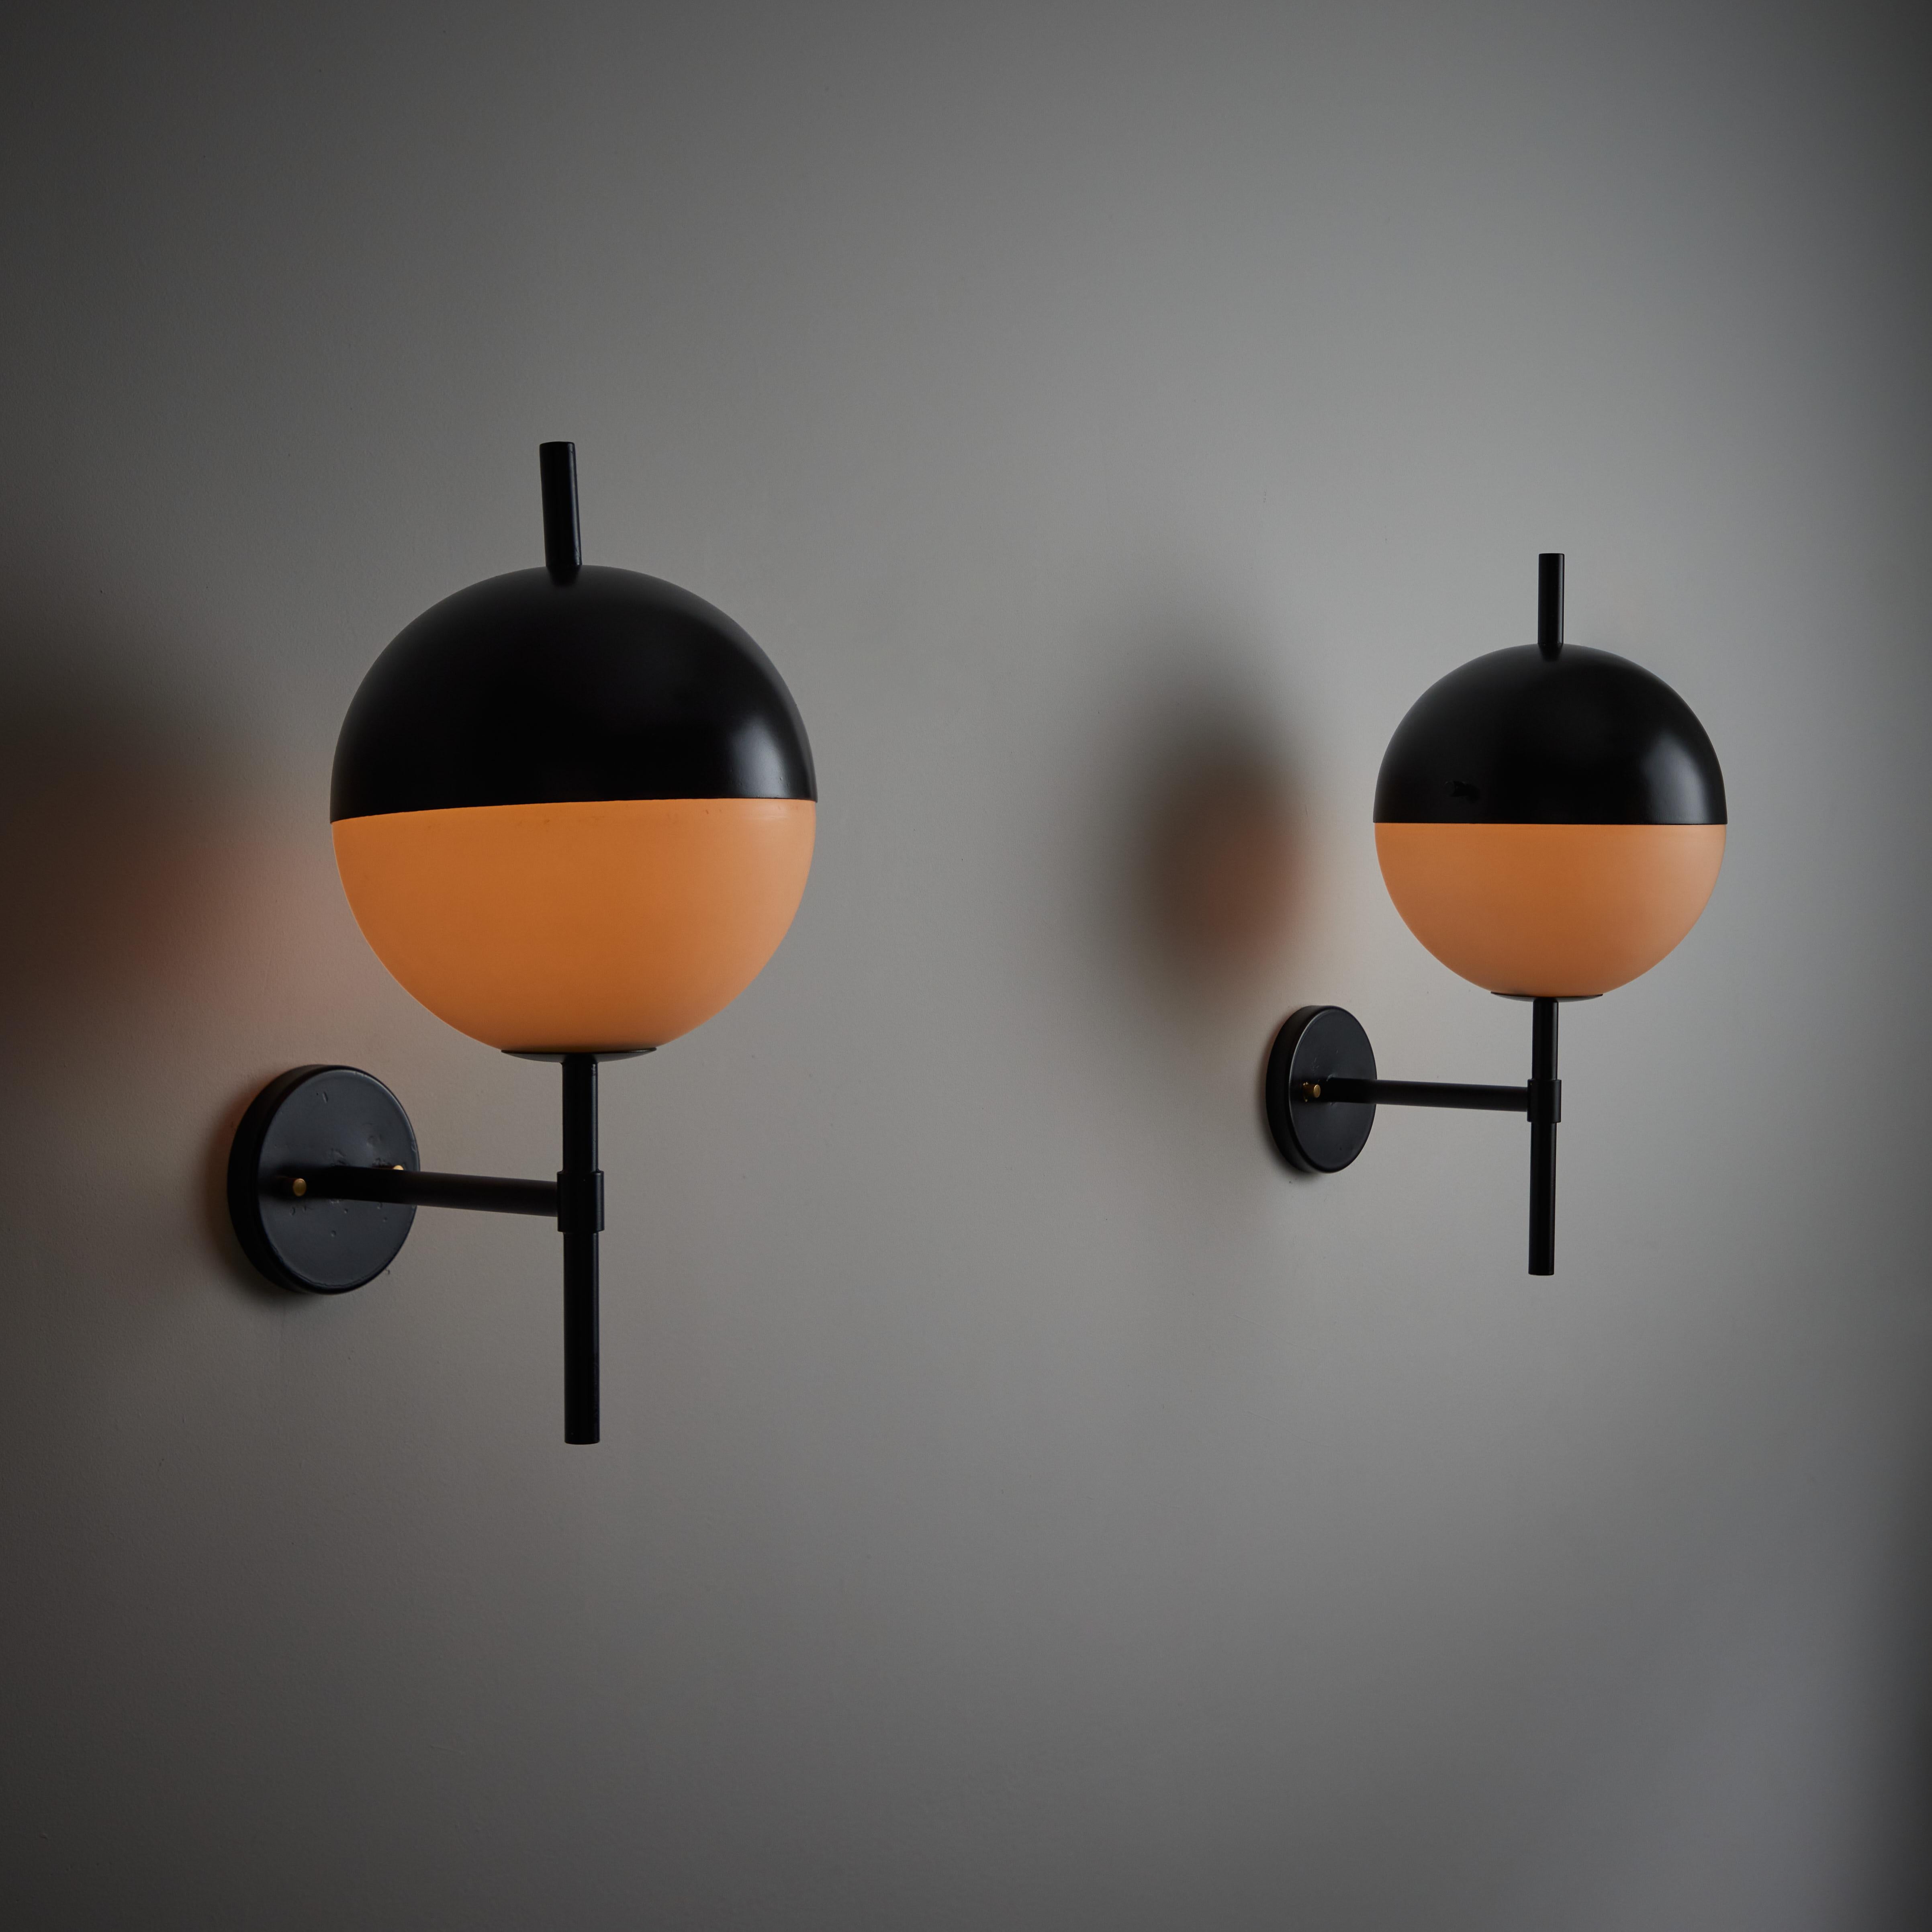 One pair of model 2071 sconces by Stilnovo. Manufactured in Italy, circa 1950s. Half and half black and white opal spheres make up these simply beautiful and unique sconces. Each sconce holds one E27 socket, adapted for the US. We recommend one 40w